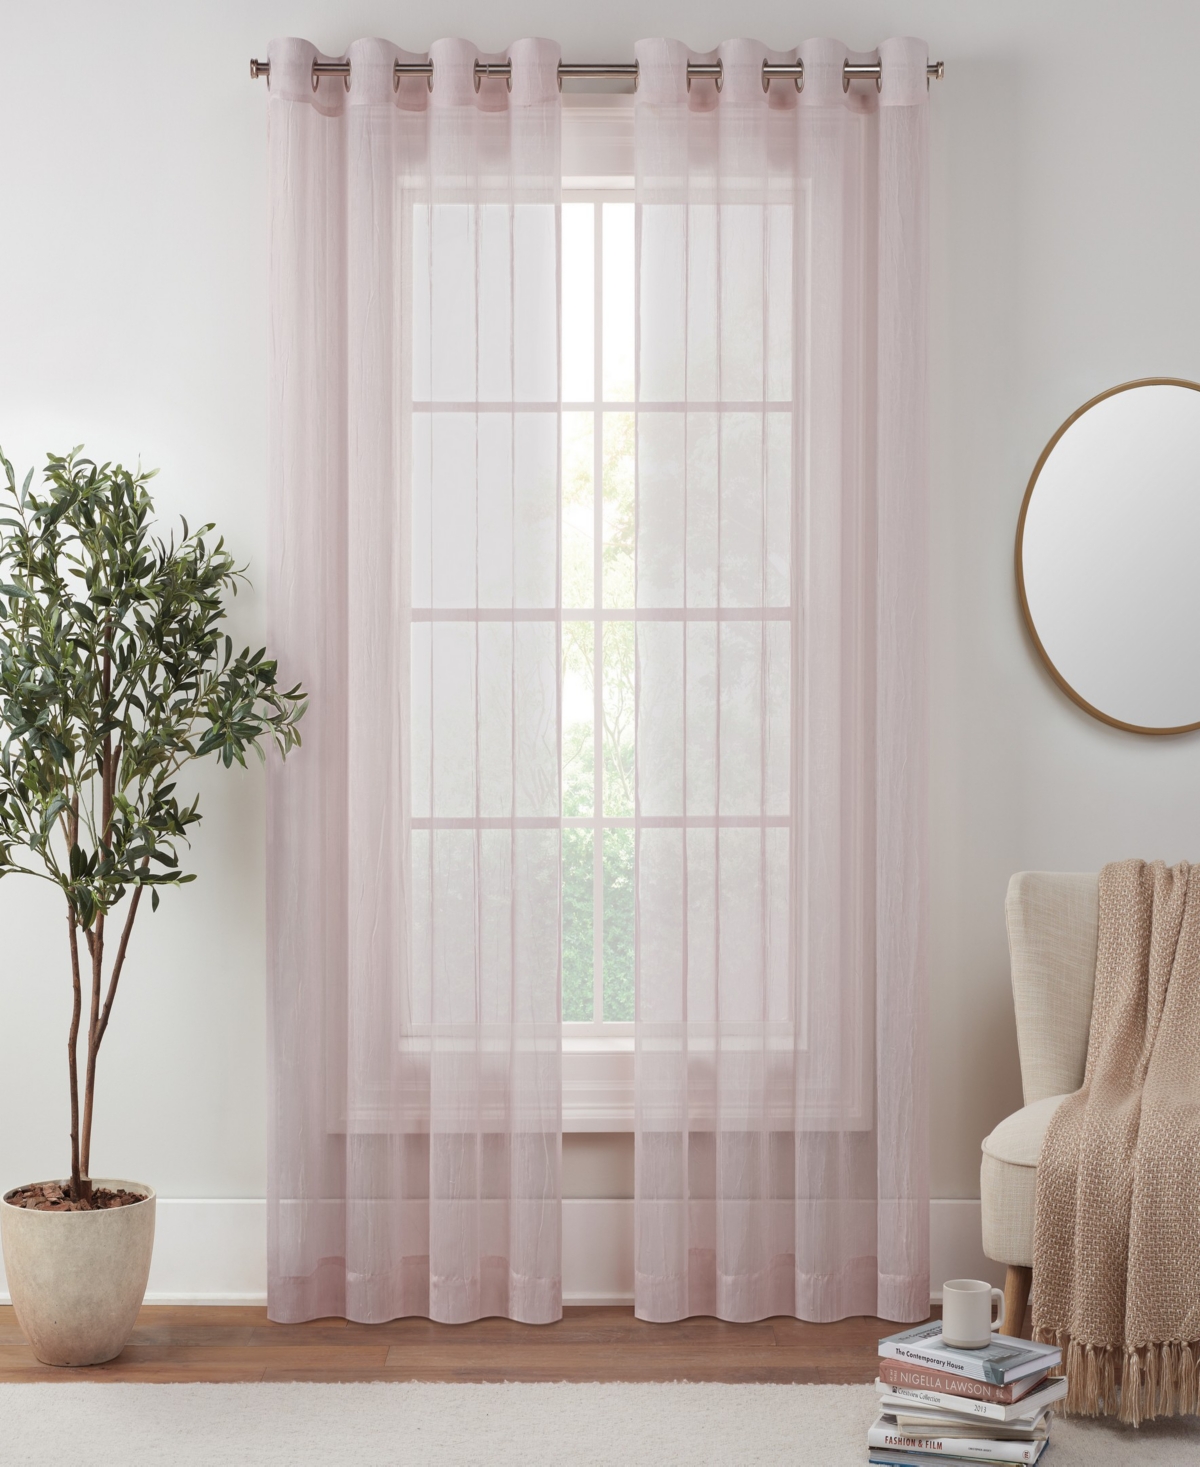 Eclipse Emina Crushed Sheer Voile Grommet Curtain Panel, 50" X 63" In Blush